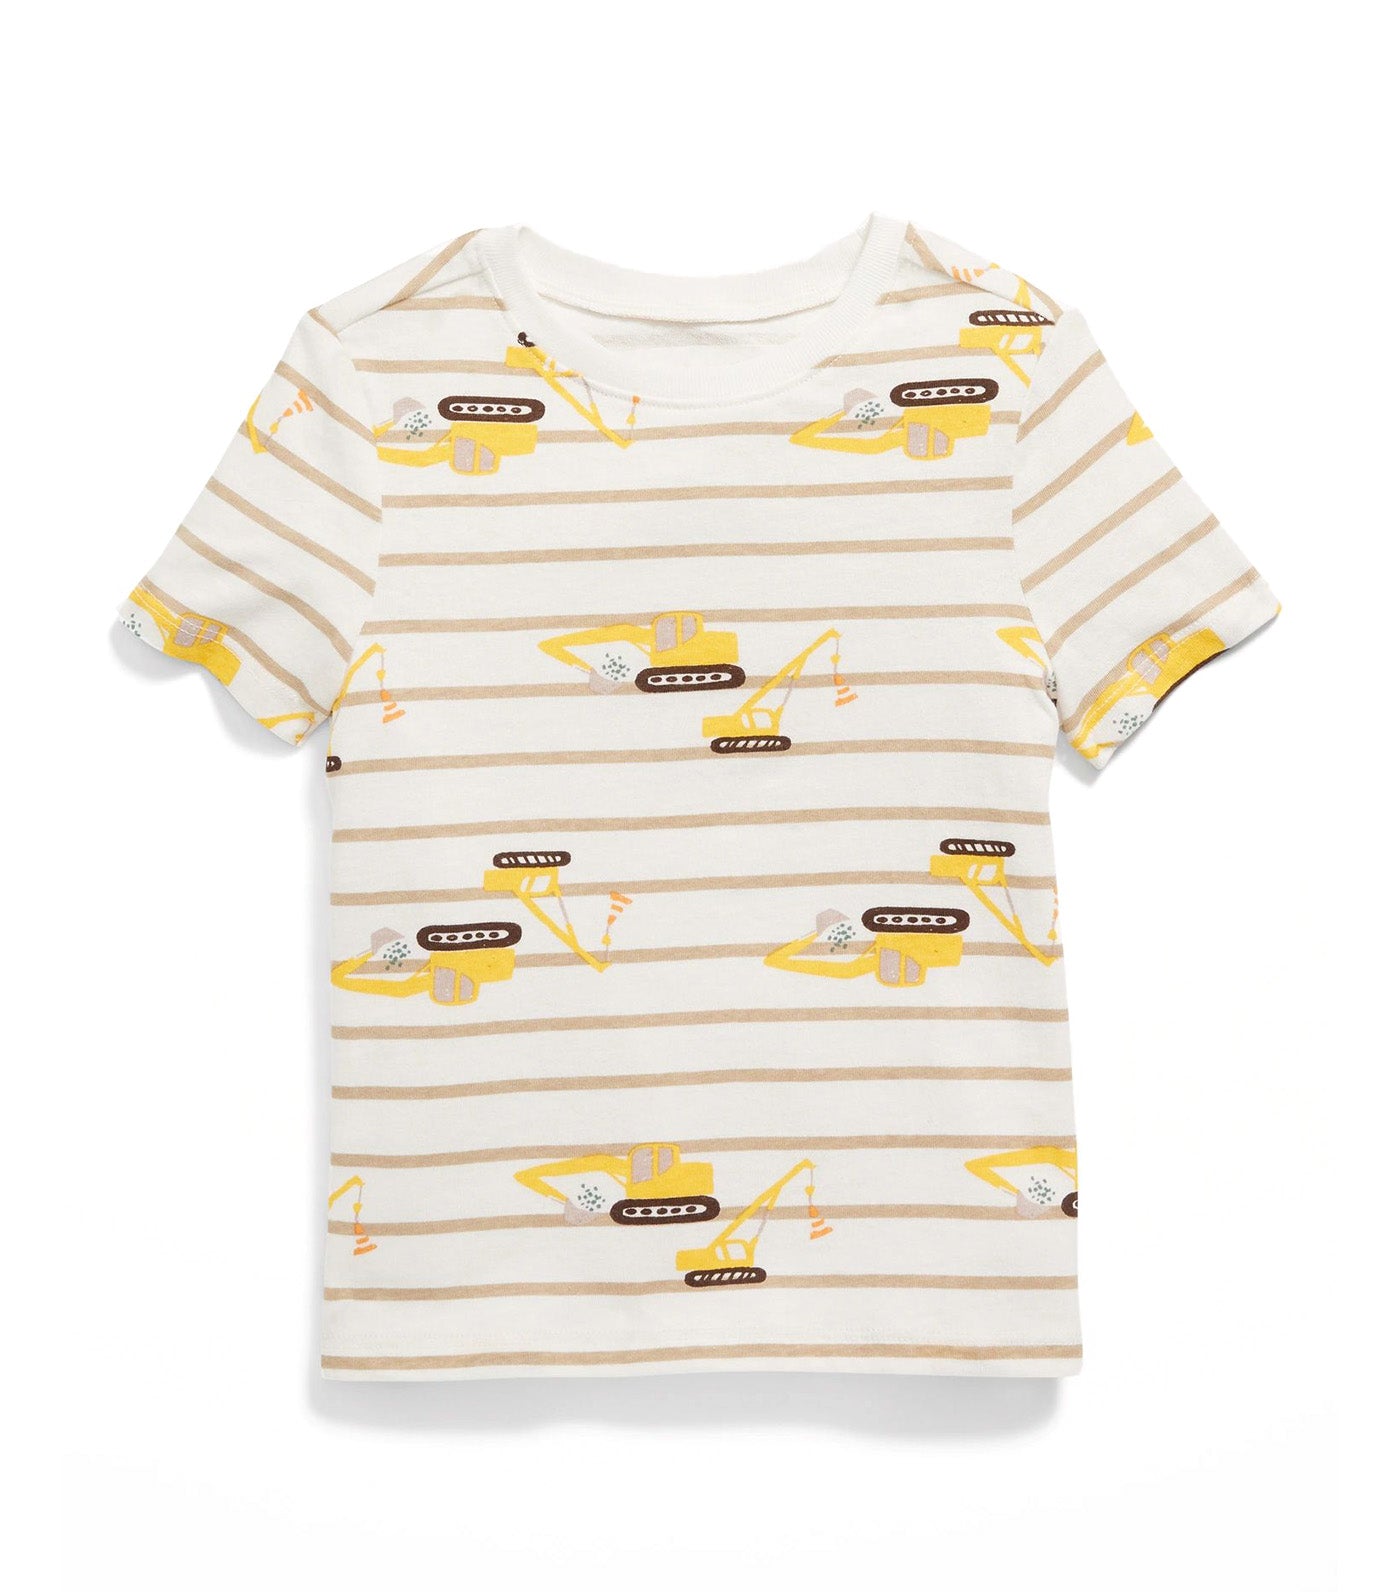 Unisex Printed T-Shirt for Toddler - Tractor